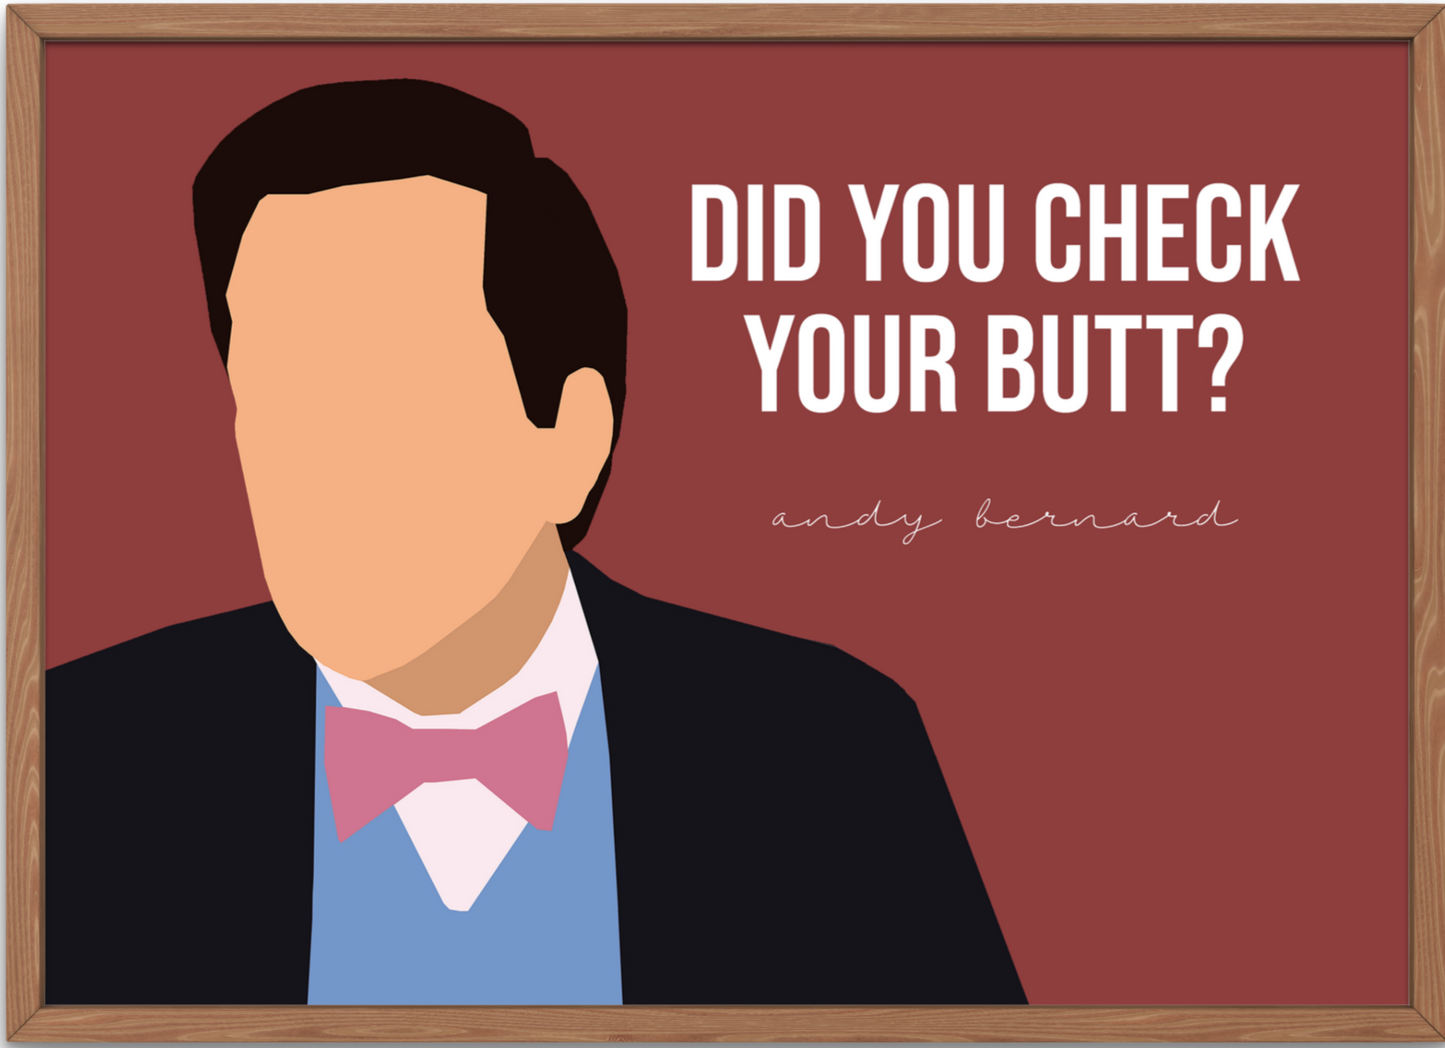 The Office Poster | Andy Bernard Quote “Did You Check Your Butt?”